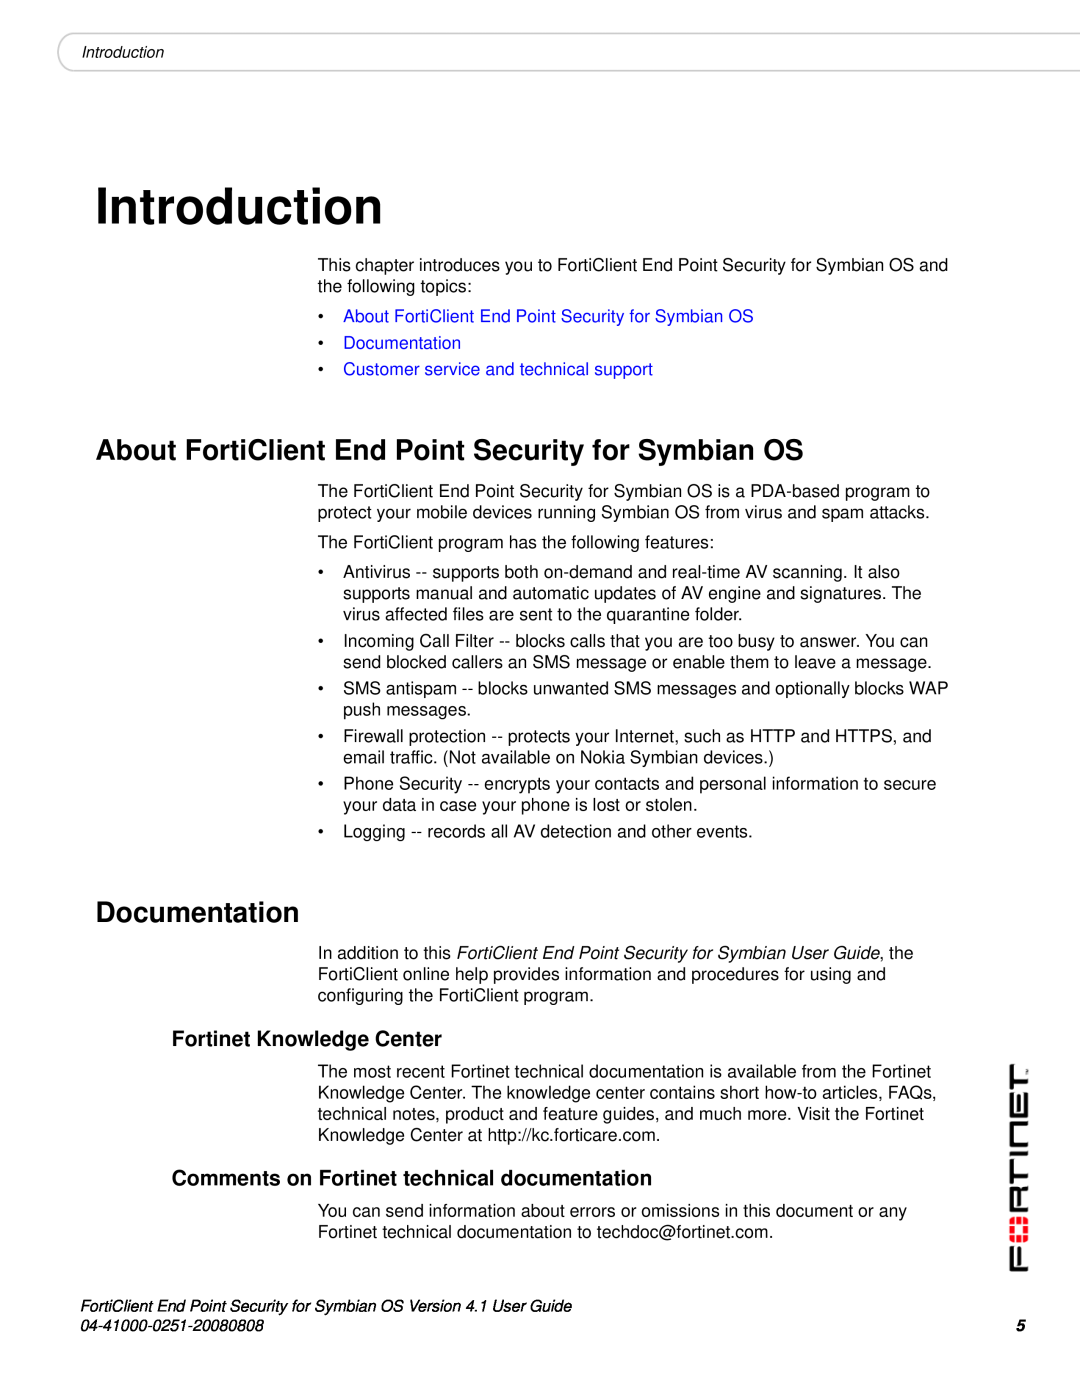 Fortinet Version 4.1 manual Introduction, About FortiClient End Point Security for Symbian OS, Documentation 